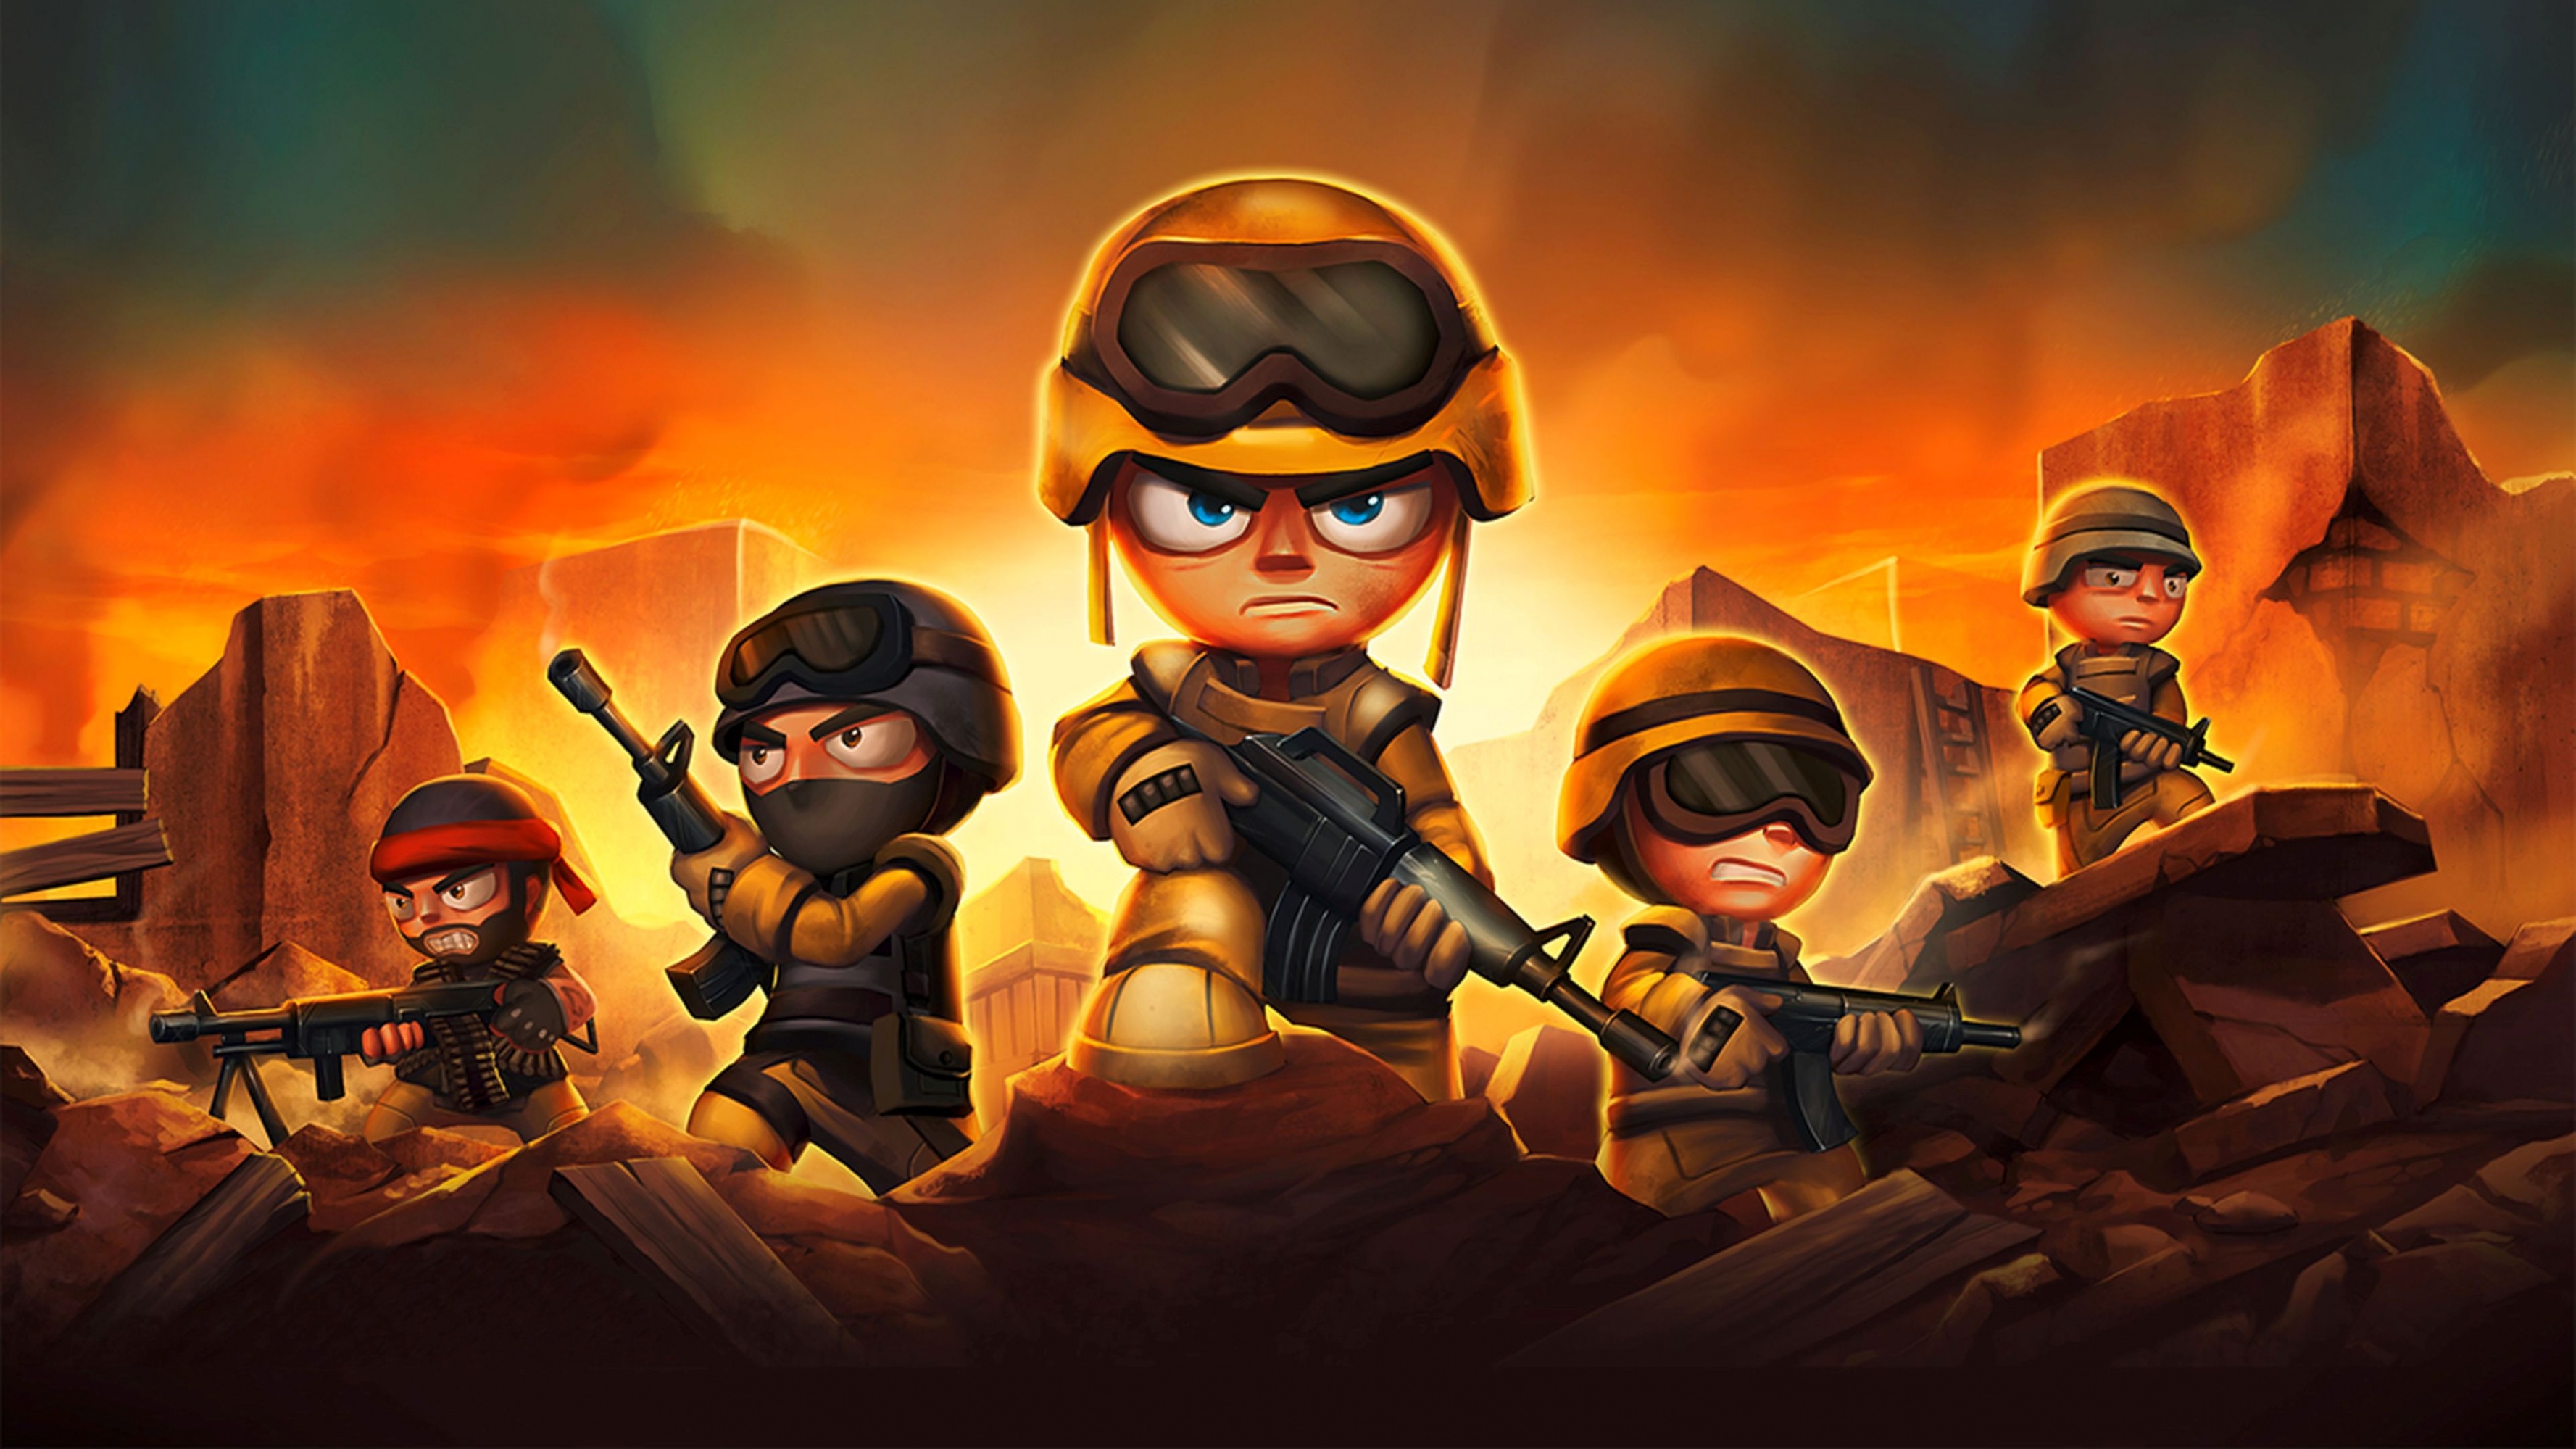 free Tiny Troopers Joint Ops XL for iphone instal